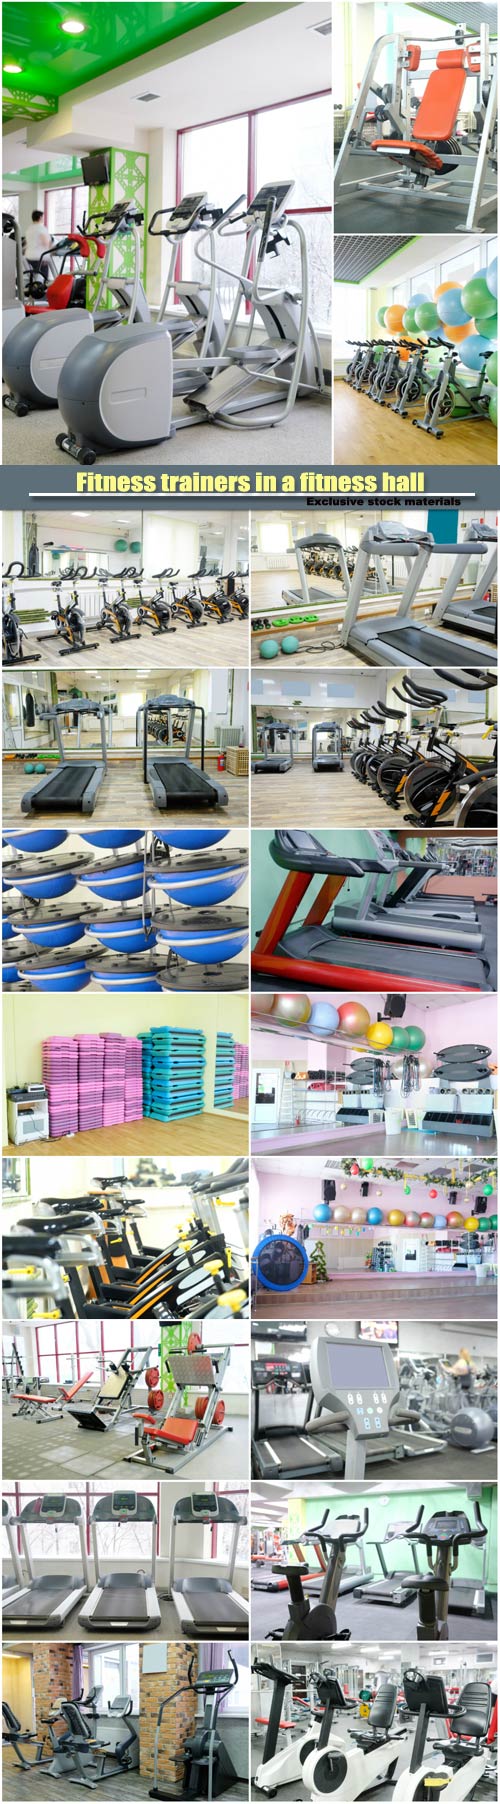 Fitness trainers in a fitness hall